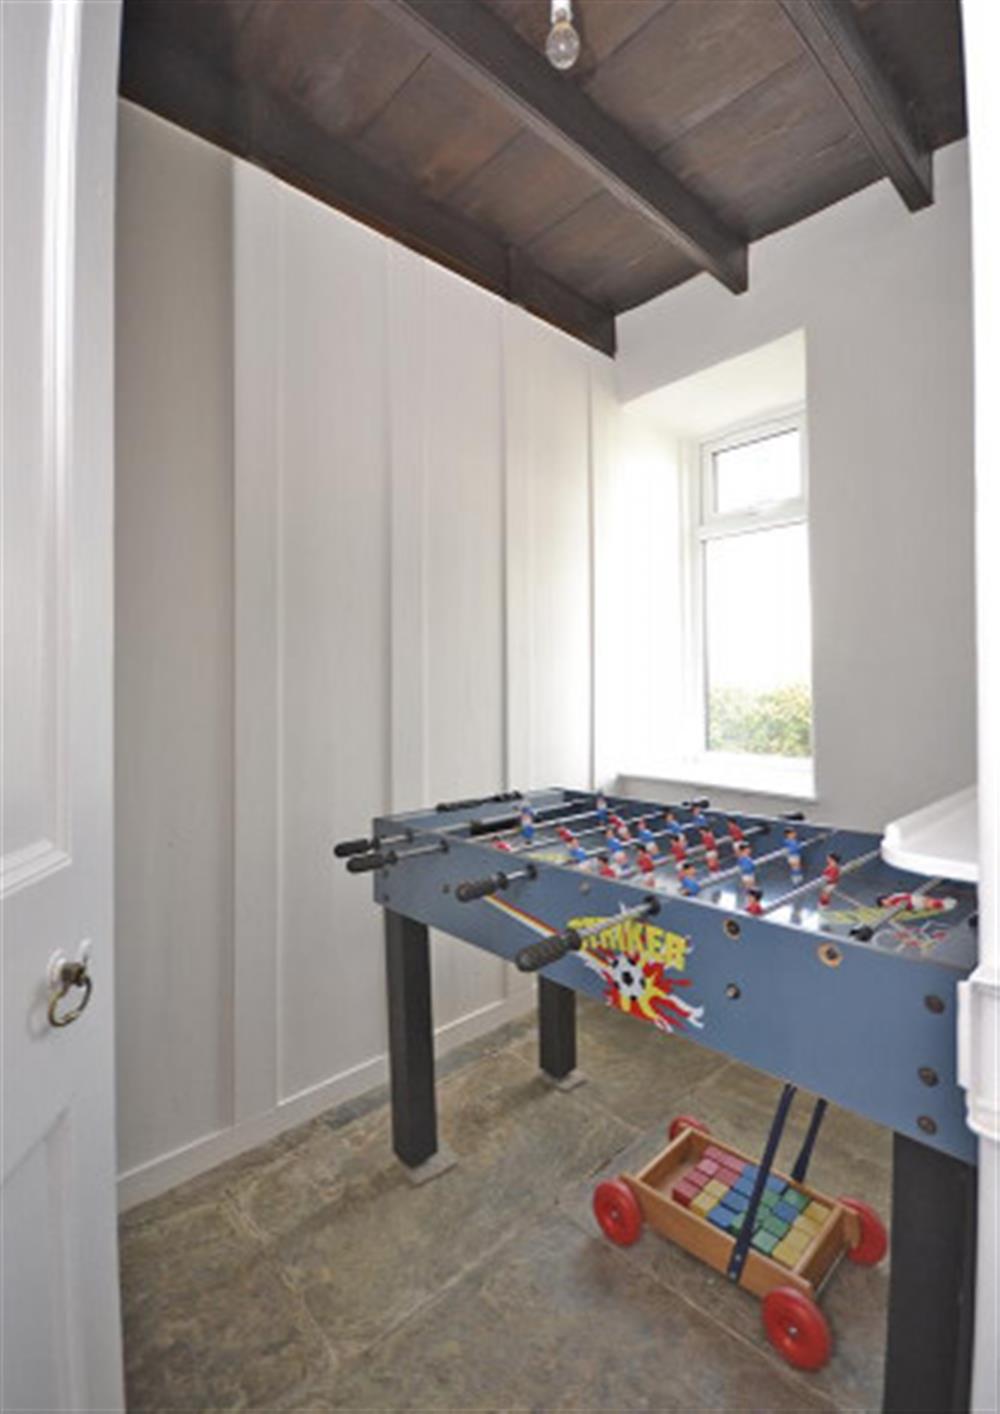 The football table room, off the hall.